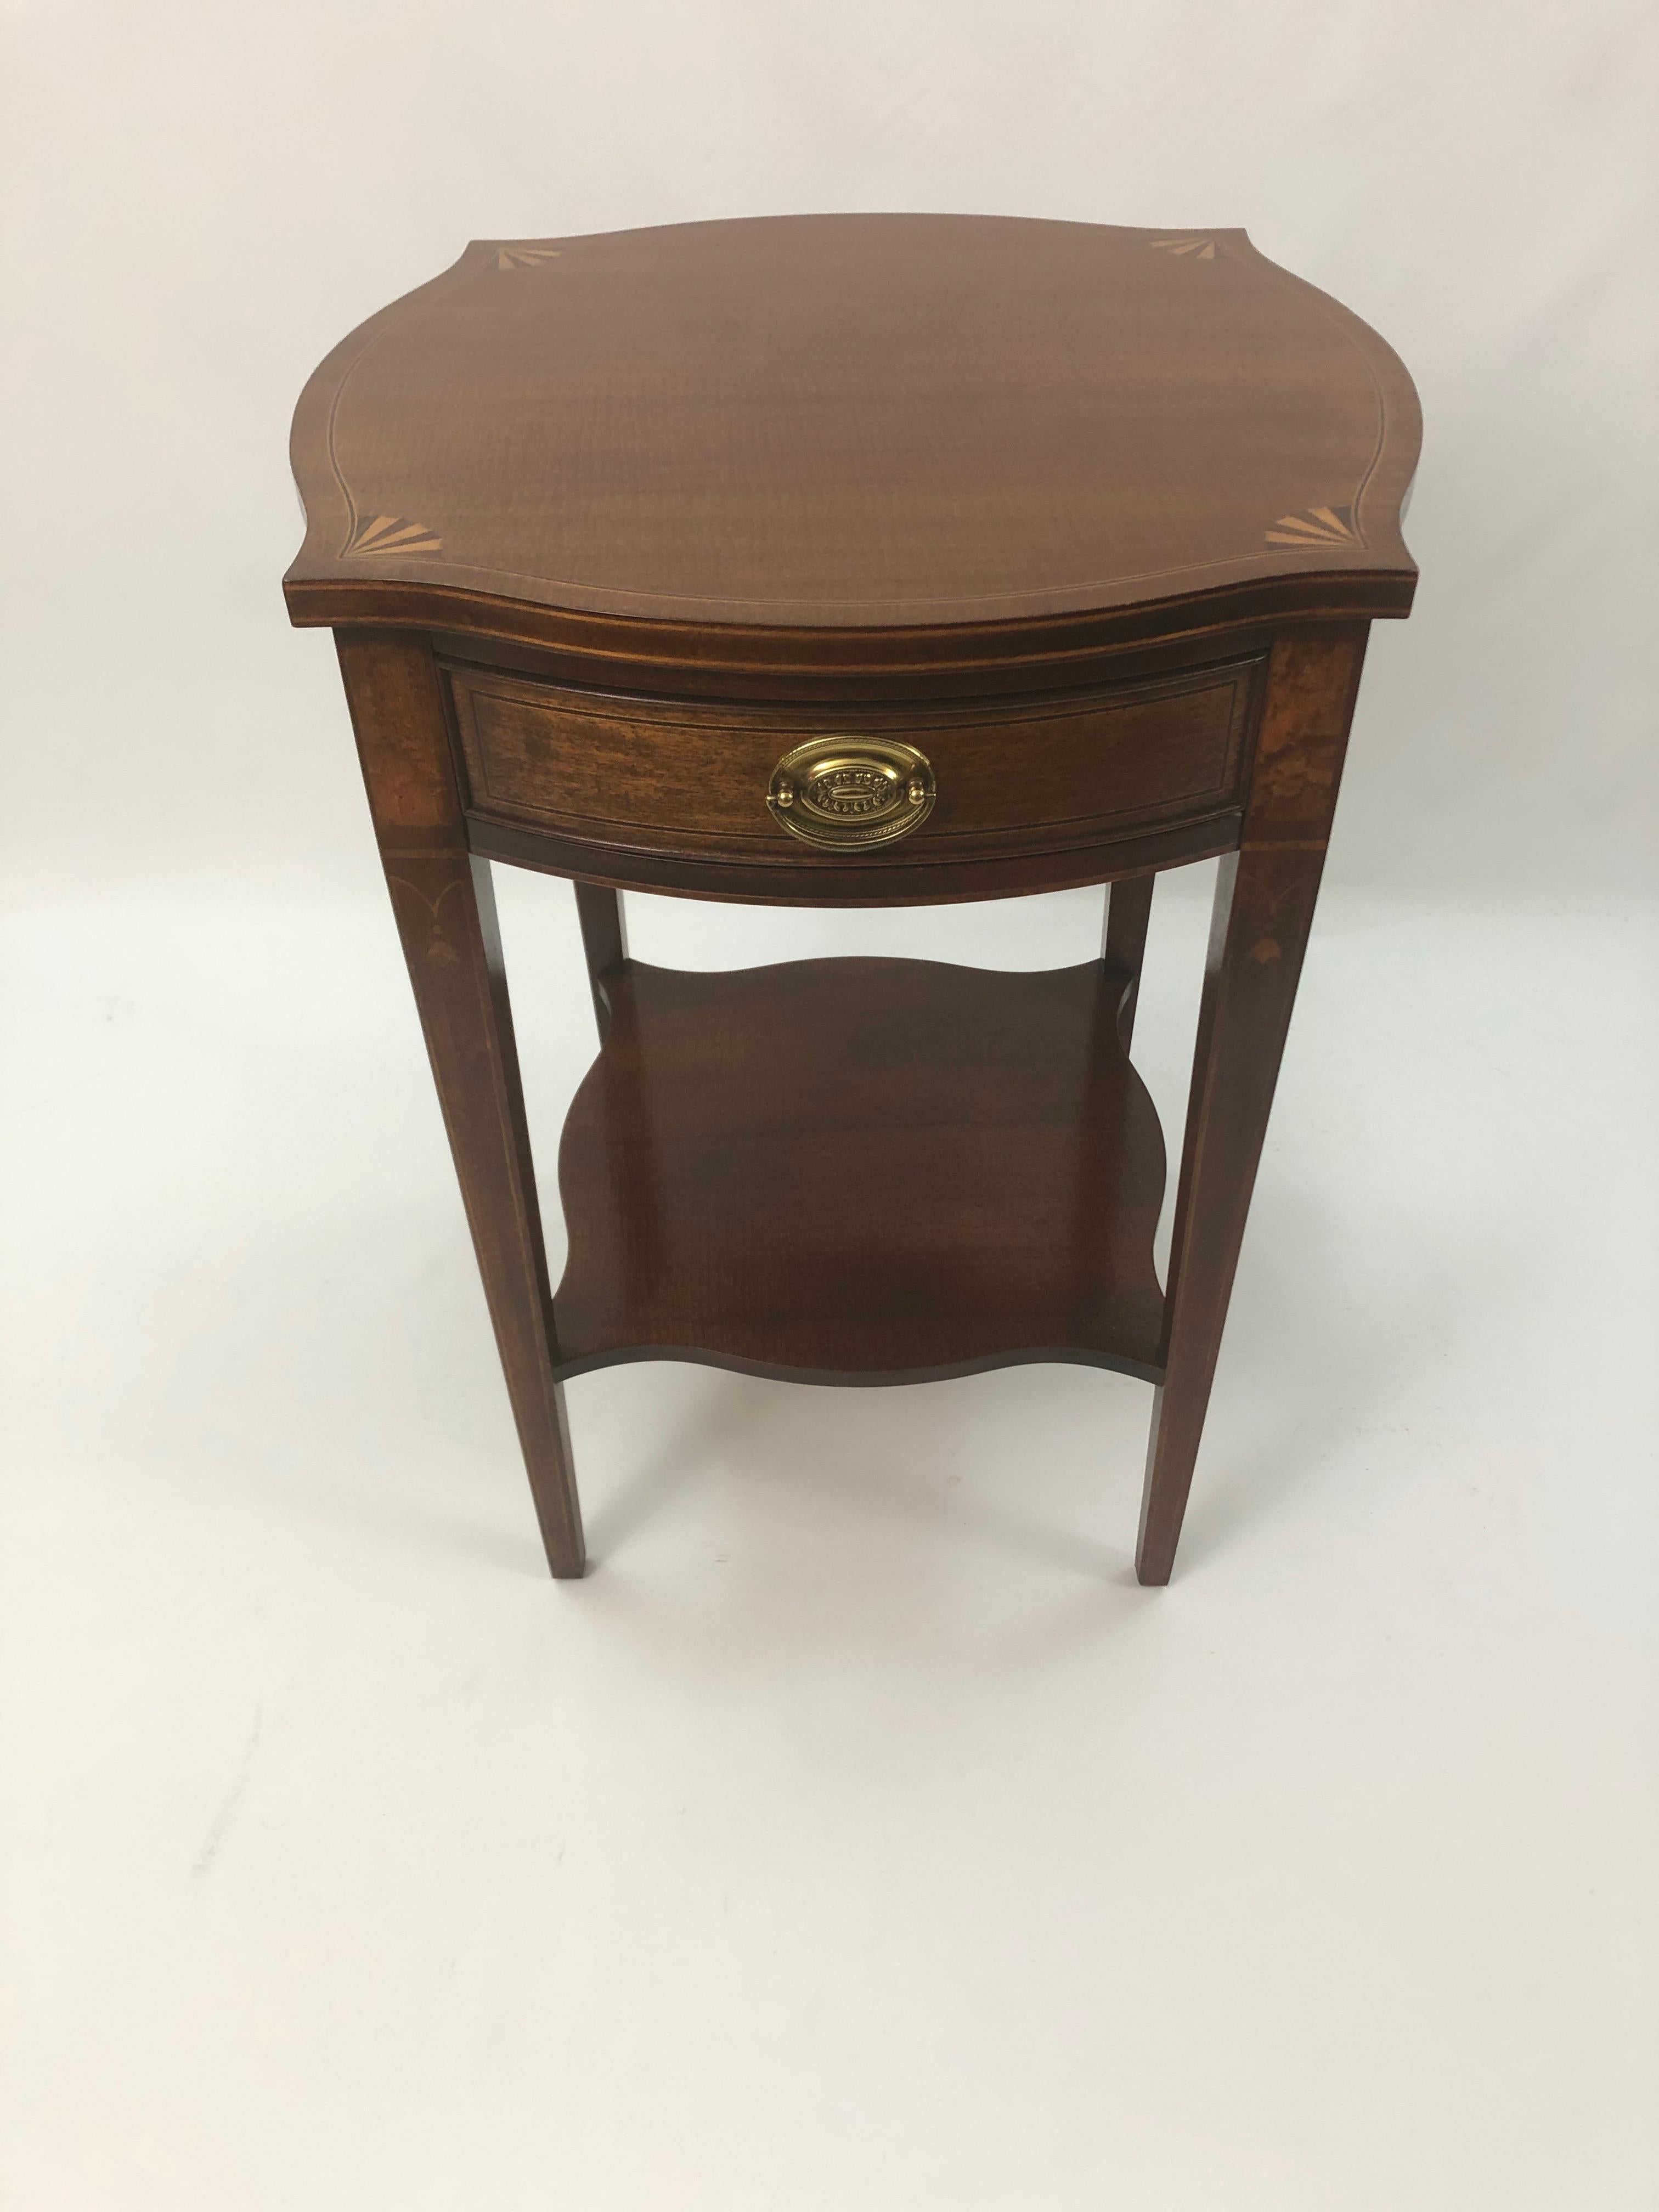 Classic mahogany and satinwood inlay side table with pretty pointed corners and fan design, tapered legs with bellflower decoration, and single drawer.